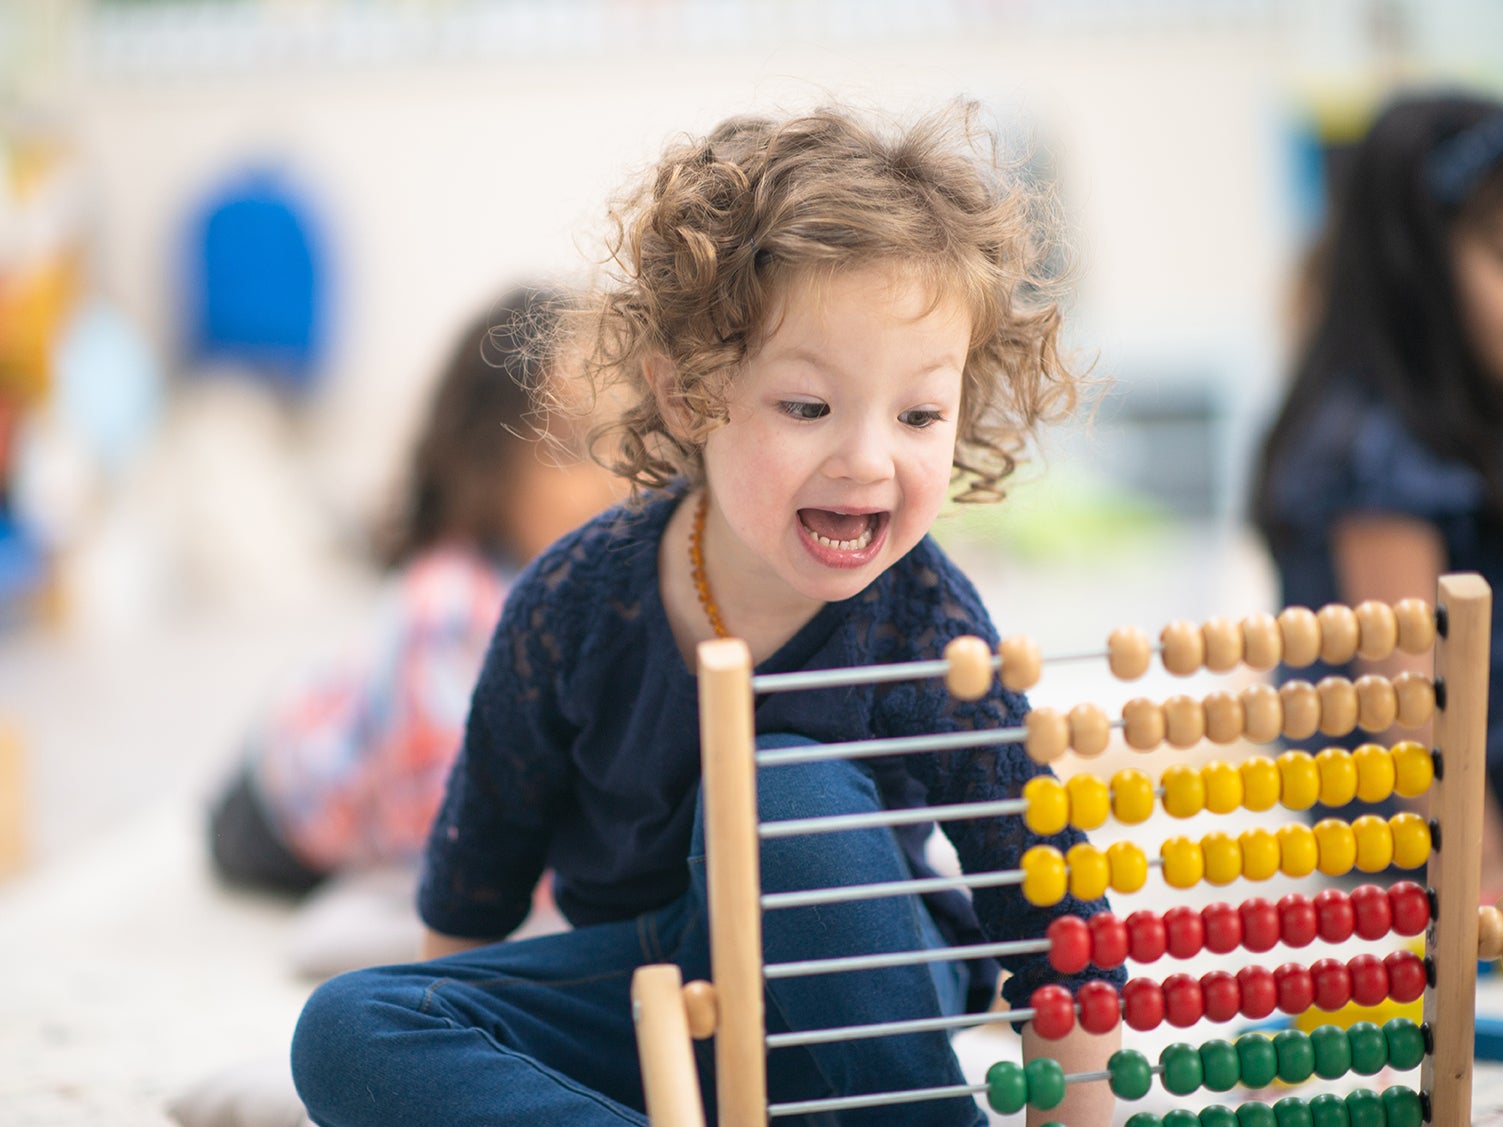 Will my children come home crowing because they got to use the latest, newfangled equipment in numeracy lessons – an abacus?